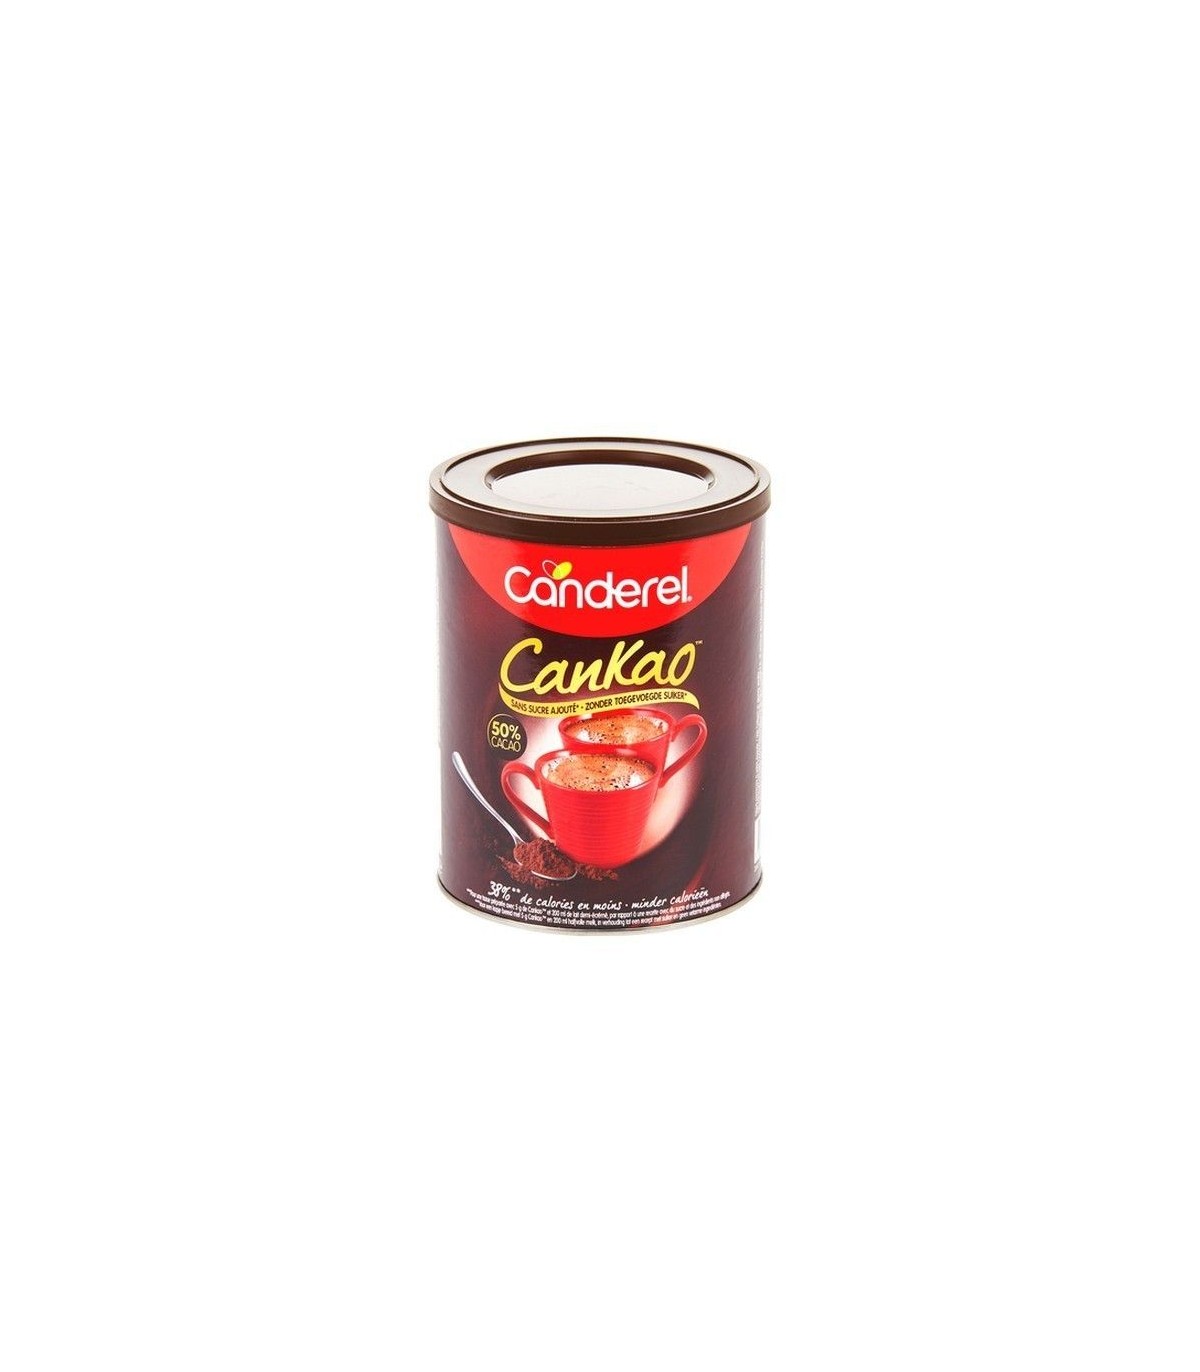 Cankao - Canderel